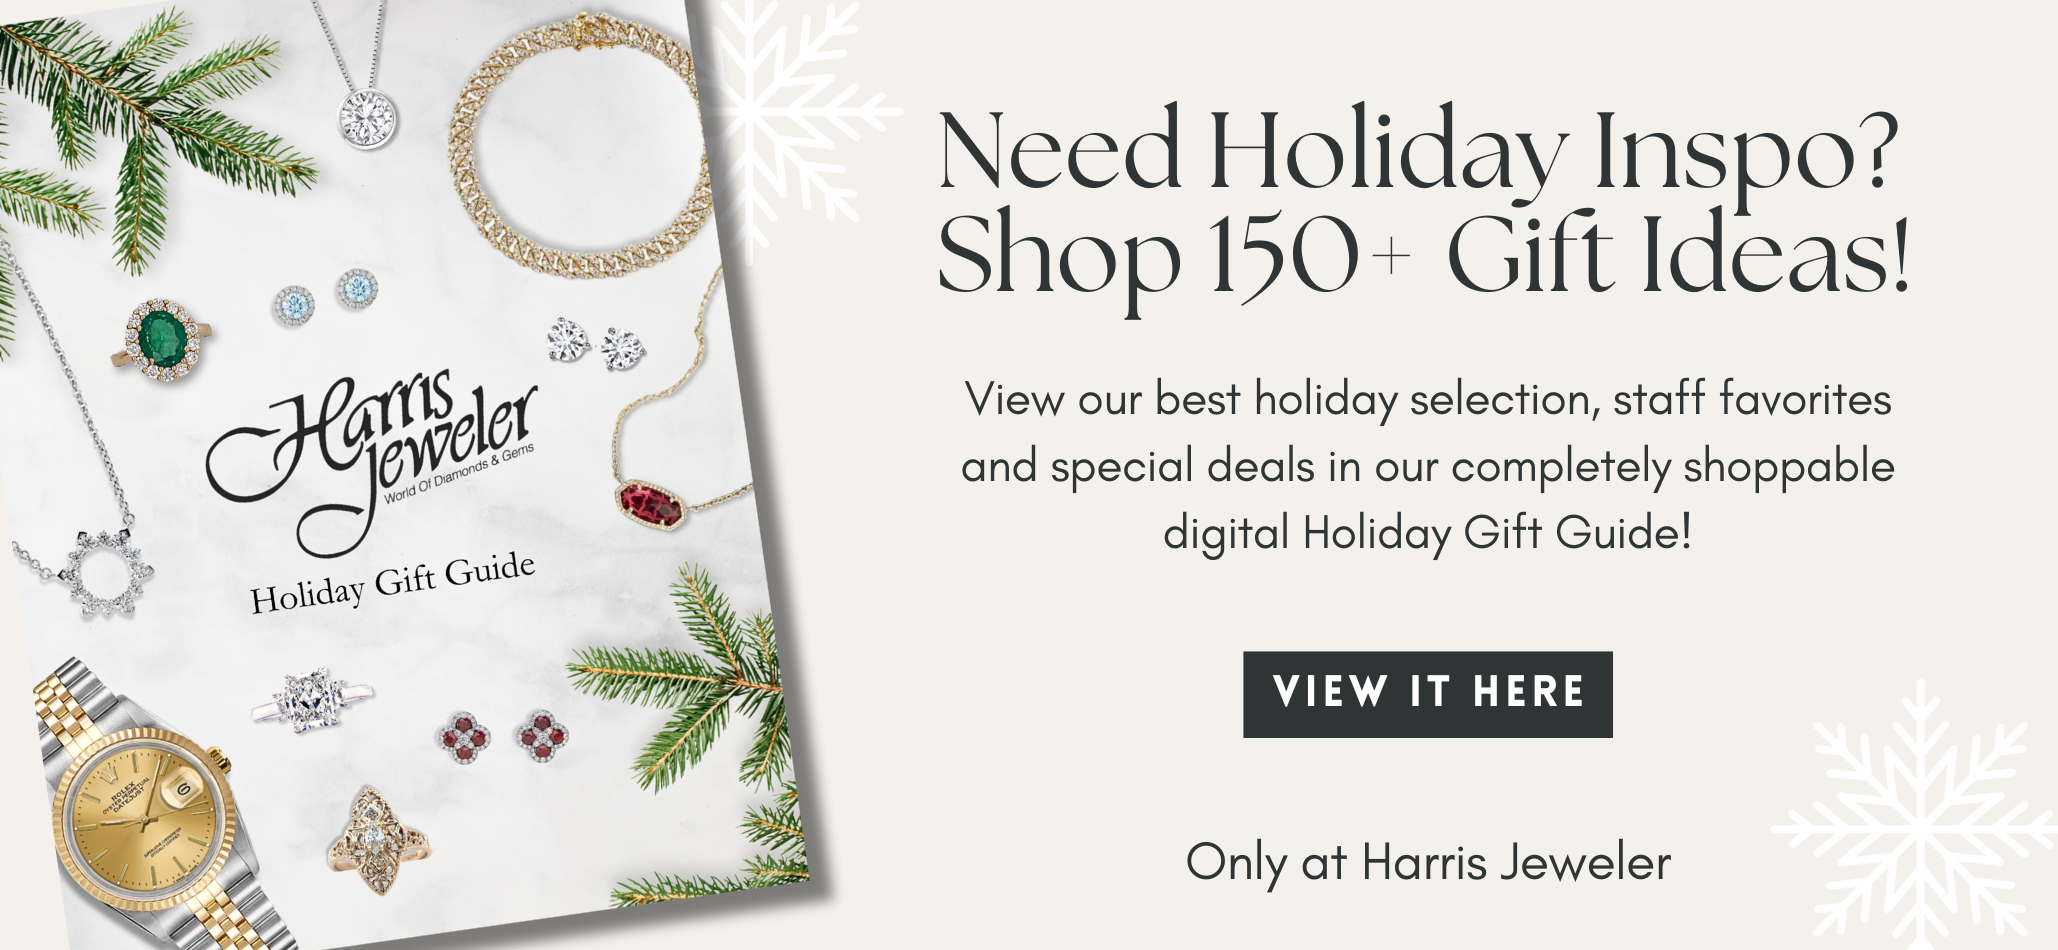 Shop over 150 holiday gift ideas with the Harris Jeweler Holiday Gift Guide!